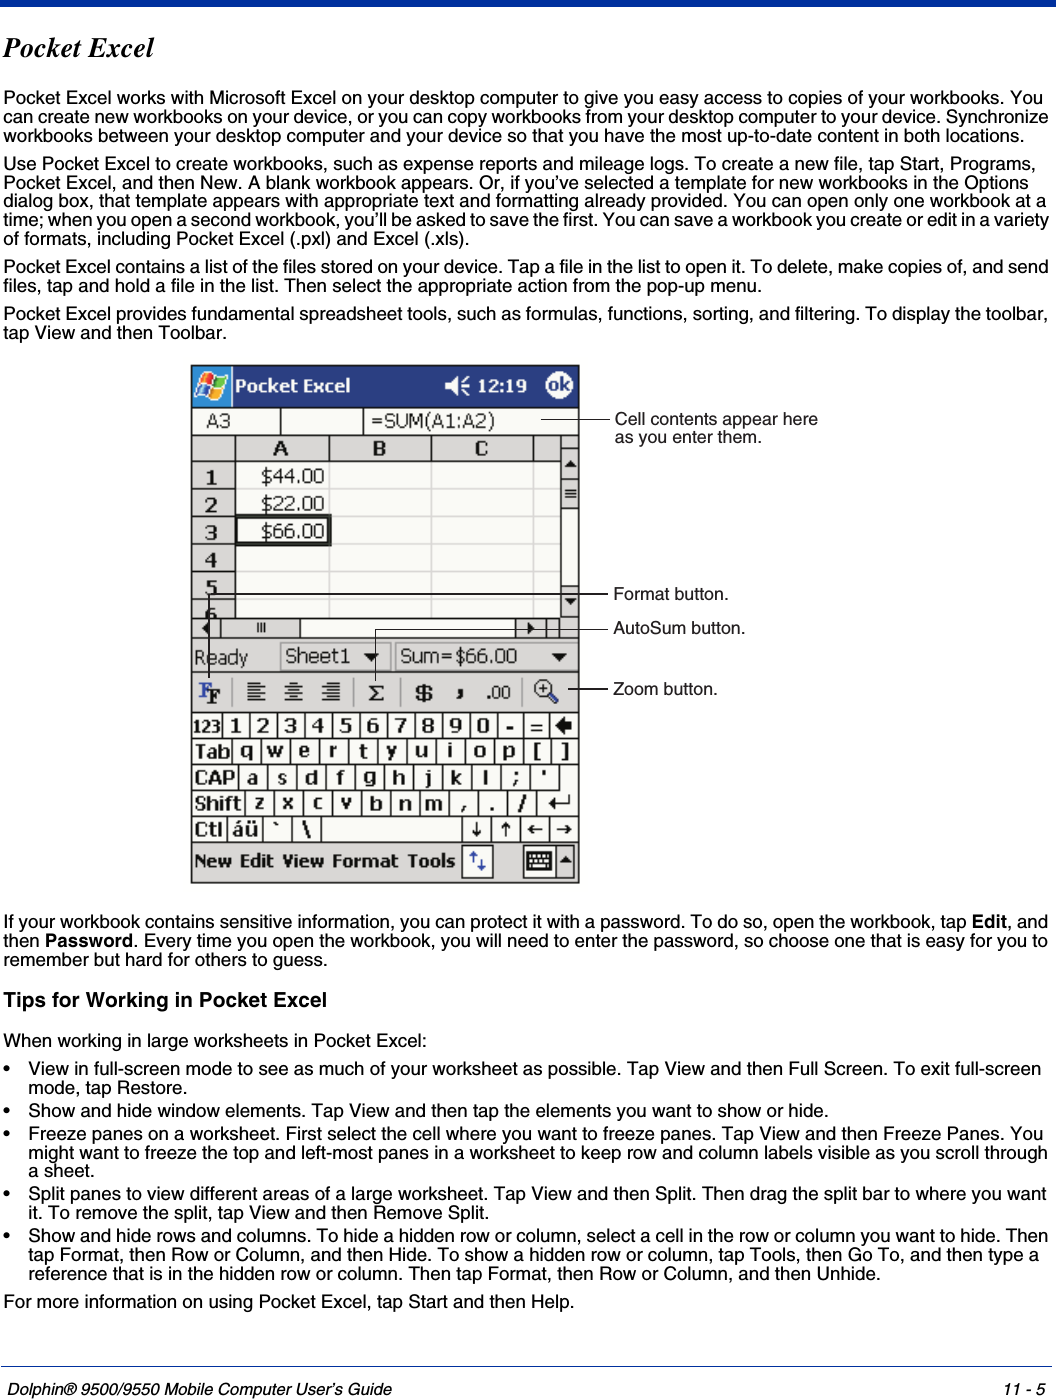 Dolphin® 9500/9550 Mobile Computer User’s Guide 11 - 5Pocket ExcelPocket Excel works with Microsoft Excel on your desktop computer to give you easy access to copies of your workbooks. You can create new workbooks on your device, or you can copy workbooks from your desktop computer to your device. Synchronize workbooks between your desktop computer and your device so that you have the most up-to-date content in both locations.Use Pocket Excel to create workbooks, such as expense reports and mileage logs. To create a new file, tap Start, Programs, Pocket Excel, and then New. A blank workbook appears. Or, if you’ve selected a template for new workbooks in the Options dialog box, that template appears with appropriate text and formatting already provided. You can open only one workbook at a time; when you open a second workbook, you’ll be asked to save the first. You can save a workbook you create or edit in a variety of formats, including Pocket Excel (.pxl) and Excel (.xls).Pocket Excel contains a list of the files stored on your device. Tap a file in the list to open it. To delete, make copies of, and send files, tap and hold a file in the list. Then select the appropriate action from the pop-up menu.Pocket Excel provides fundamental spreadsheet tools, such as formulas, functions, sorting, and filtering. To display the toolbar, tap View and then Toolbar. If your workbook contains sensitive information, you can protect it with a password. To do so, open the workbook, tap Edit, and then Password. Every time you open the workbook, you will need to enter the password, so choose one that is easy for you to remember but hard for others to guess.Tips for Working in Pocket ExcelWhen working in large worksheets in Pocket Excel:• View in full-screen mode to see as much of your worksheet as possible. Tap View and then Full Screen. To exit full-screen mode, tap Restore.• Show and hide window elements. Tap View and then tap the elements you want to show or hide.• Freeze panes on a worksheet. First select the cell where you want to freeze panes. Tap View and then Freeze Panes. You might want to freeze the top and left-most panes in a worksheet to keep row and column labels visible as you scroll through a sheet.• Split panes to view different areas of a large worksheet. Tap View and then Split. Then drag the split bar to where you want it. To remove the split, tap View and then Remove Split.• Show and hide rows and columns. To hide a hidden row or column, select a cell in the row or column you want to hide. Then tap Format, then Row or Column, and then Hide. To show a hidden row or column, tap Tools, then Go To, and then type a reference that is in the hidden row or column. Then tap Format, then Row or Column, and then Unhide.For more information on using Pocket Excel, tap Start and then Help.Cell contents appear hereas you enter them.AutoSum button.Format button.Zoom button.